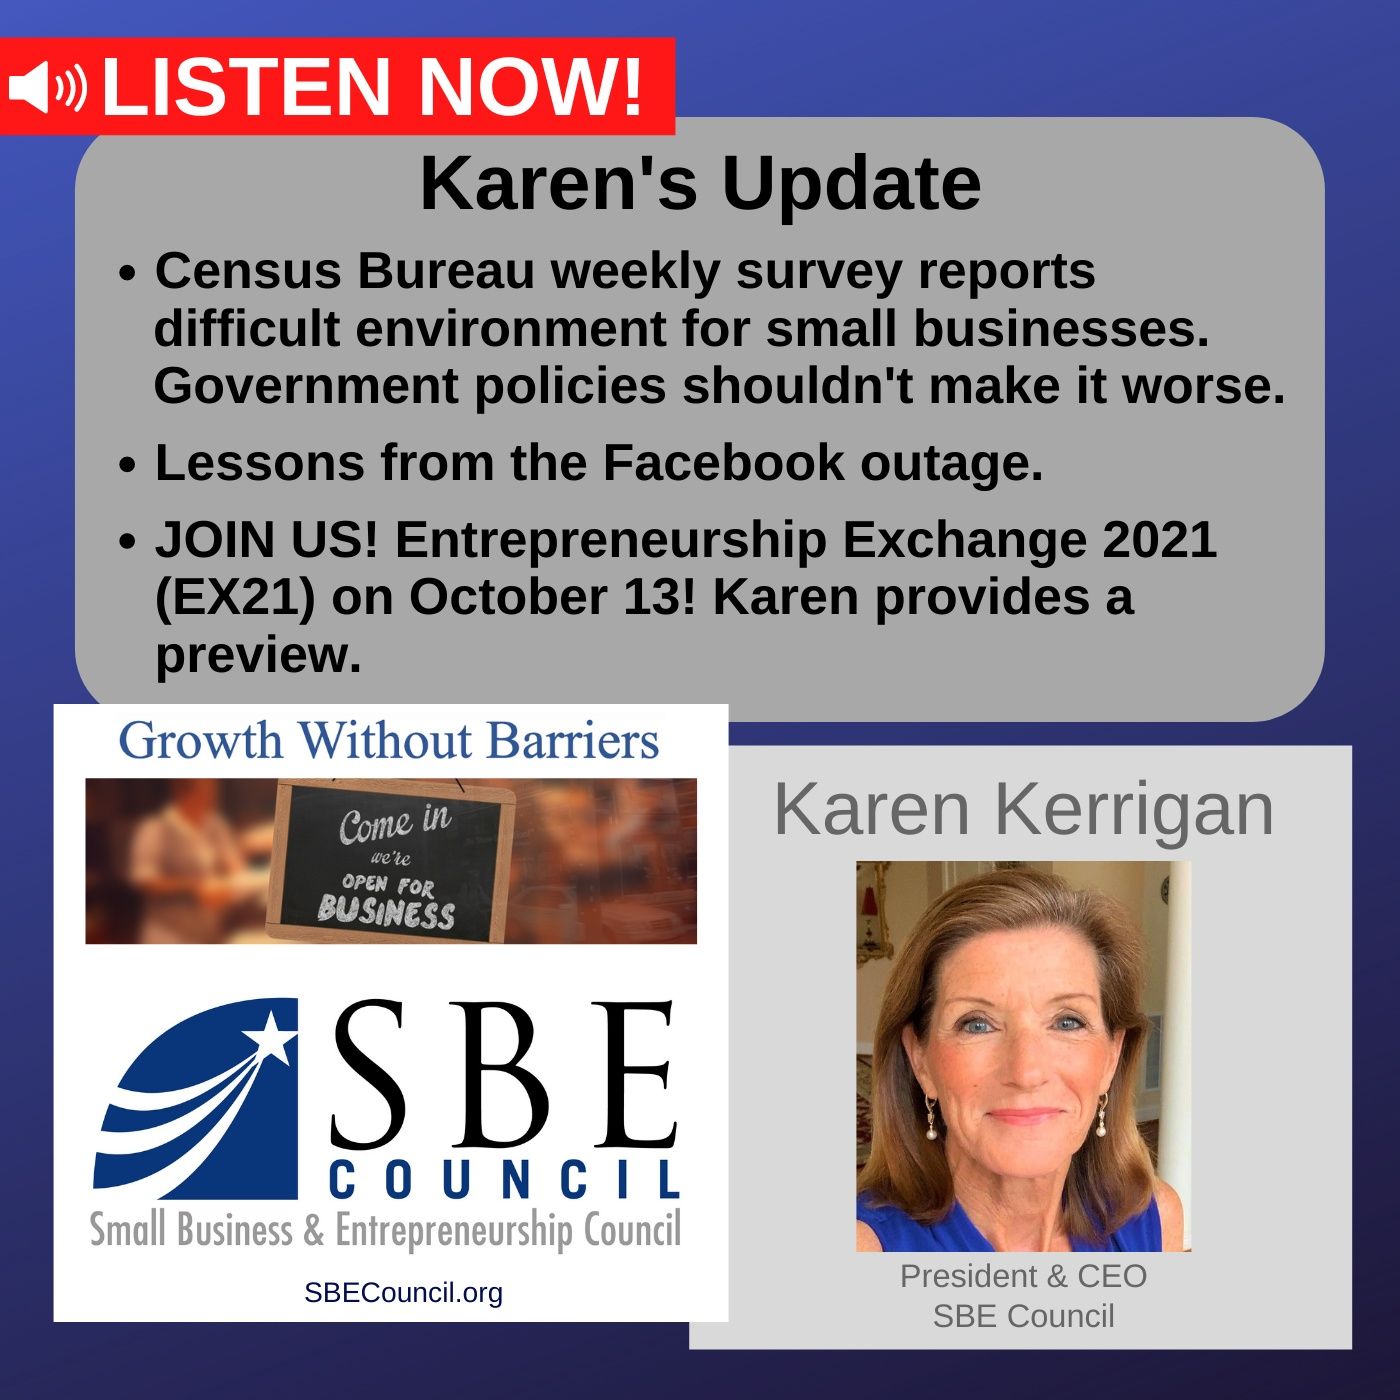 Census Bureau weekly data shows tough times for small biz; Facebook outage lessons; virtual Entrepreneurship Exchange on Weds Oct 13.